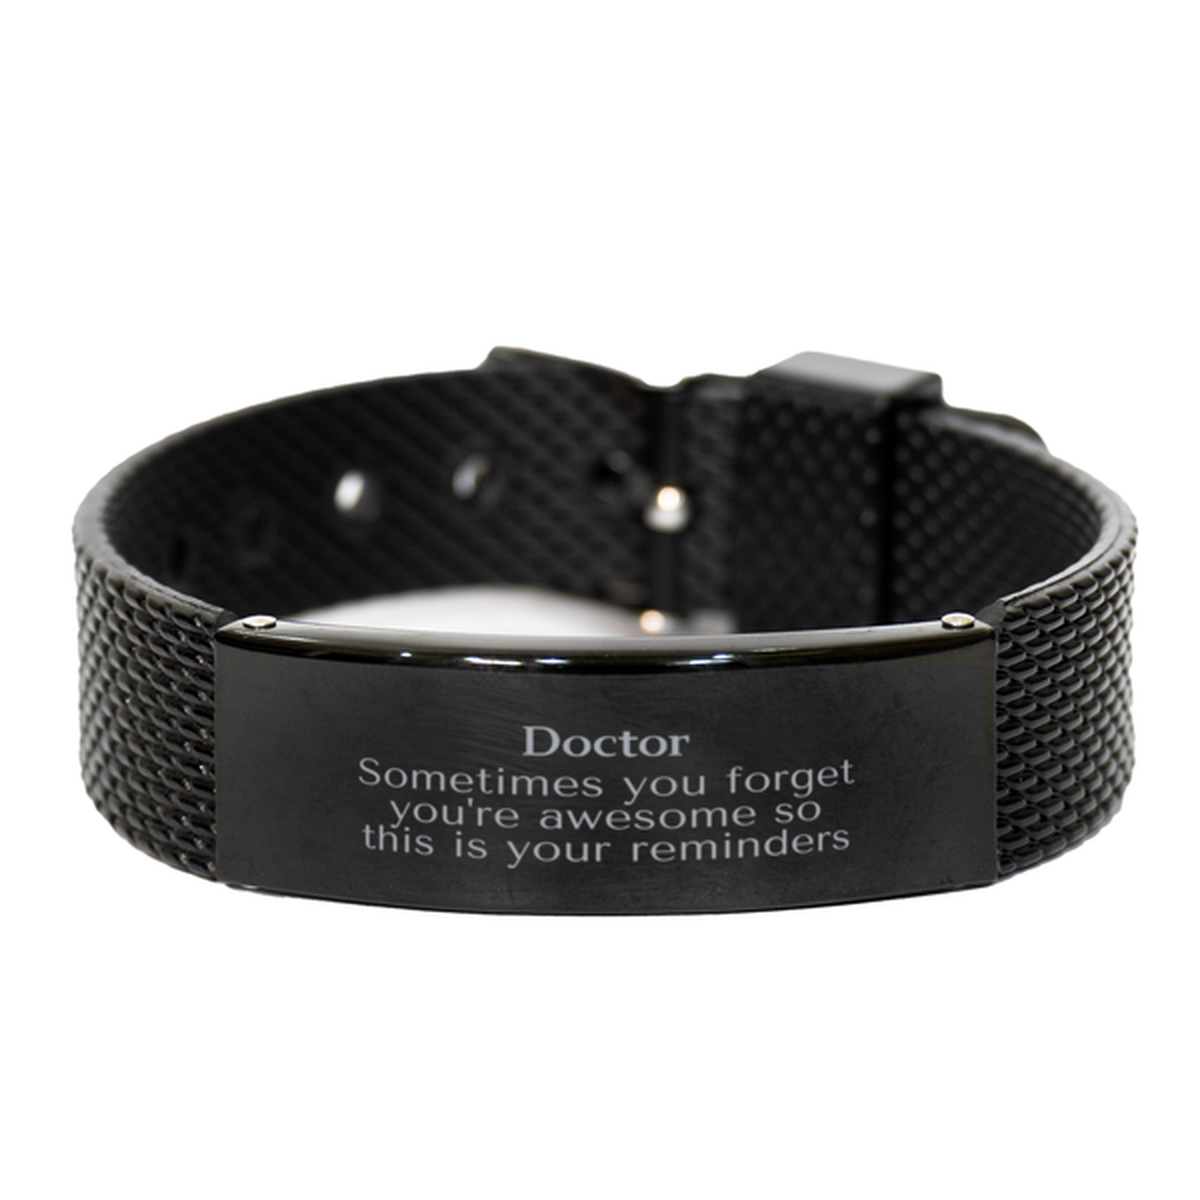 Sentimental Doctor Black Shark Mesh Bracelet, Doctor Sometimes you forget you're awesome so this is your reminders, Graduation Christmas Birthday Gifts for Doctor, Men, Women, Coworkers